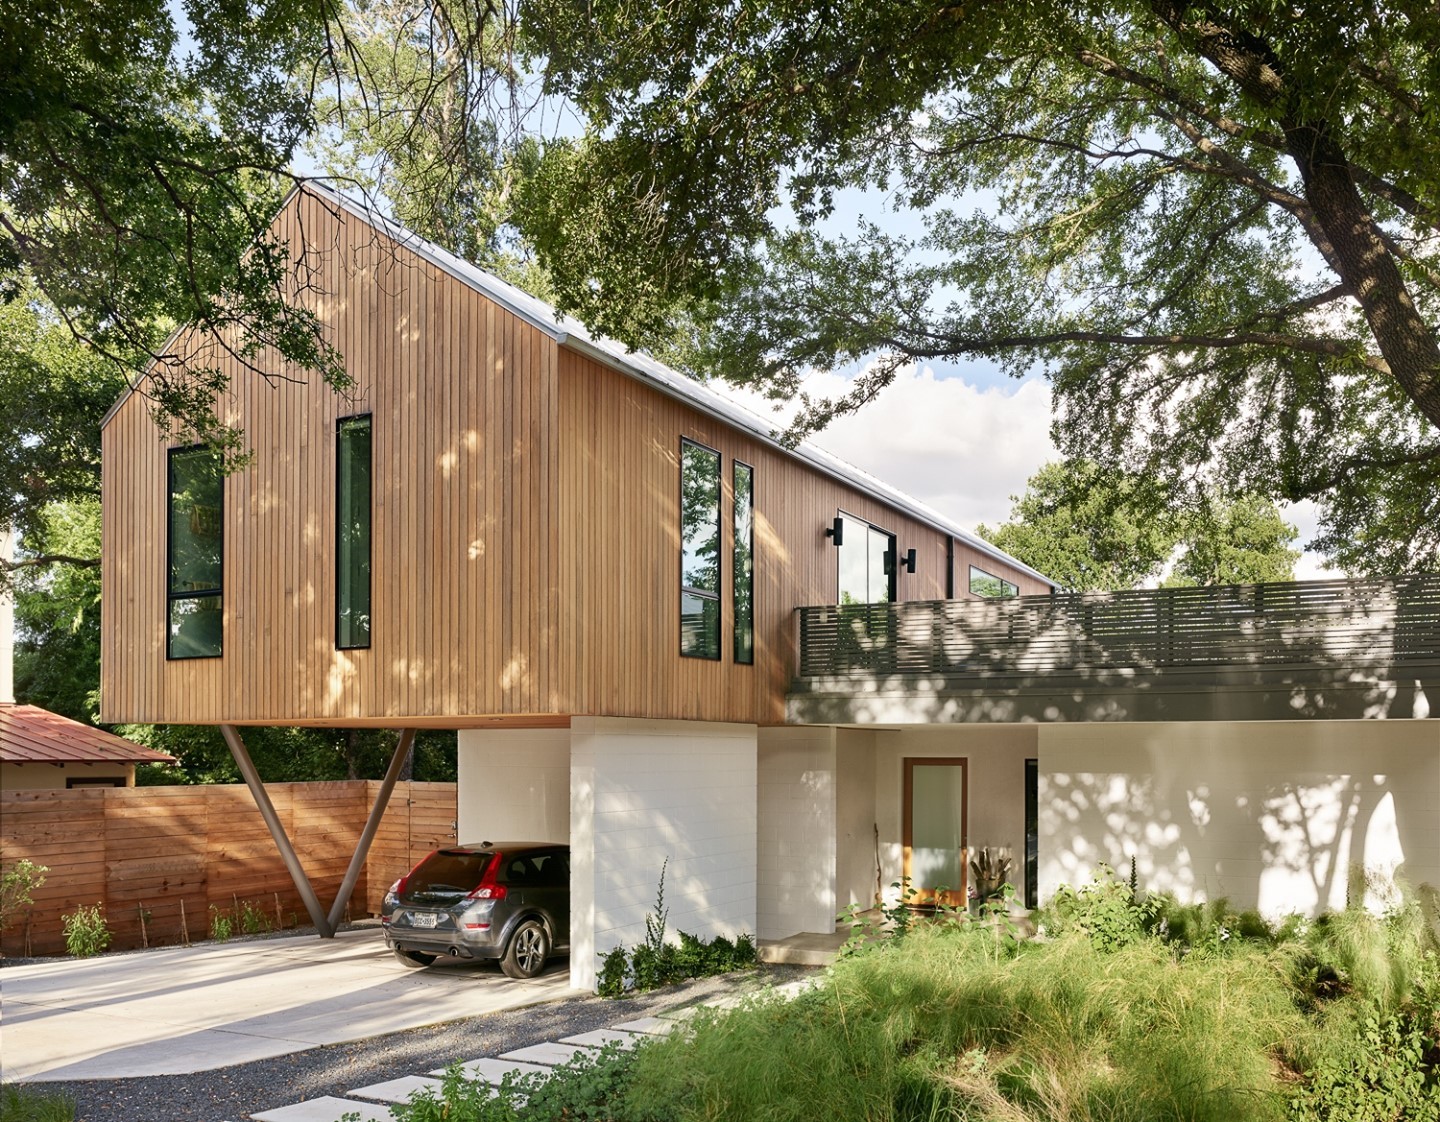 The angles make this home an architectural showstopper.